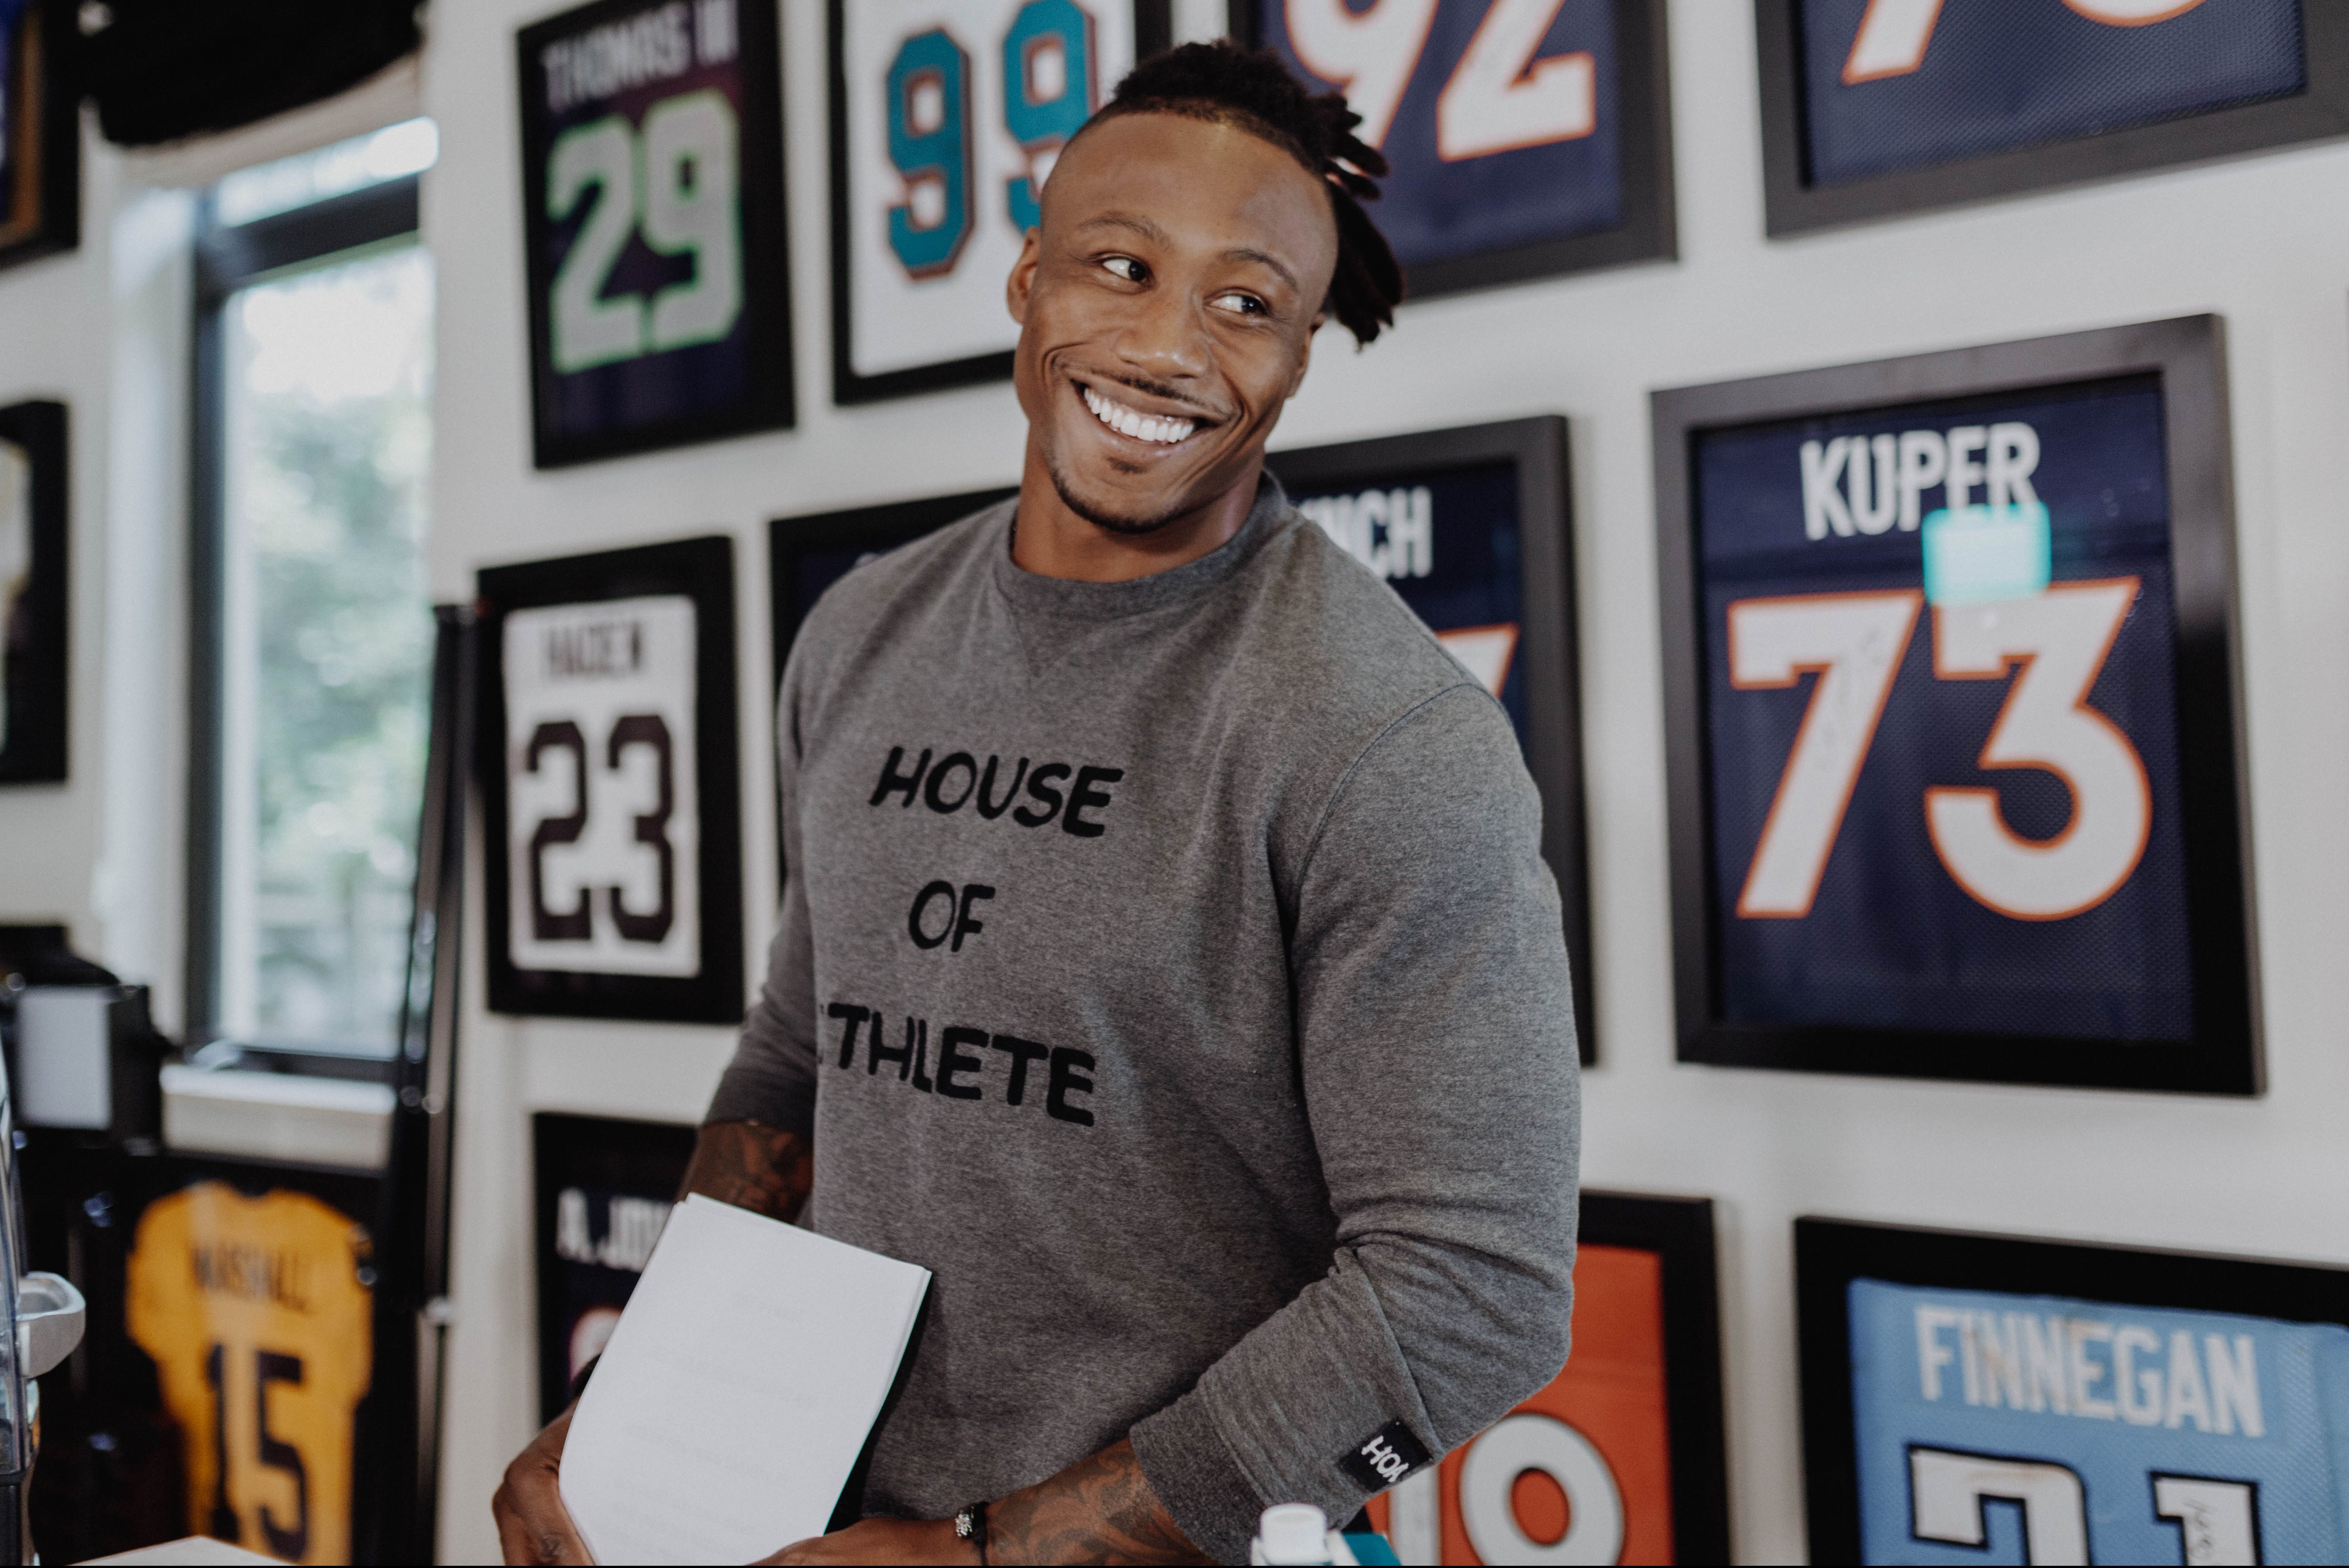 How Brandon Marshall Went From a Star NFL Player to a Star NFL Analyst